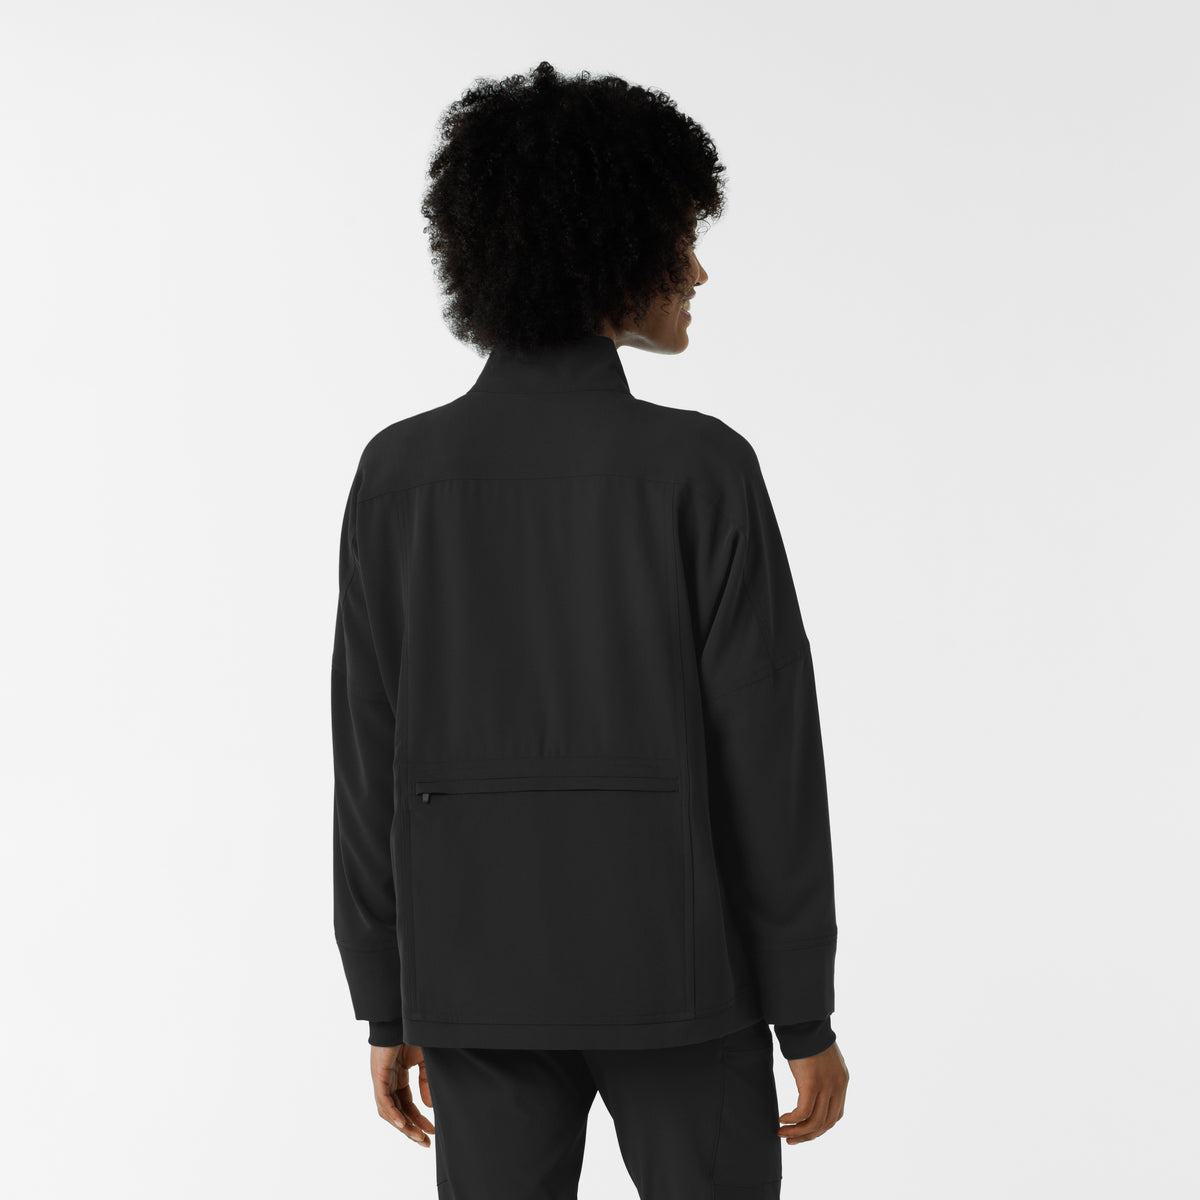 Knits and Layers Women's Germs Happen Packable Scrub Jacket Black back view